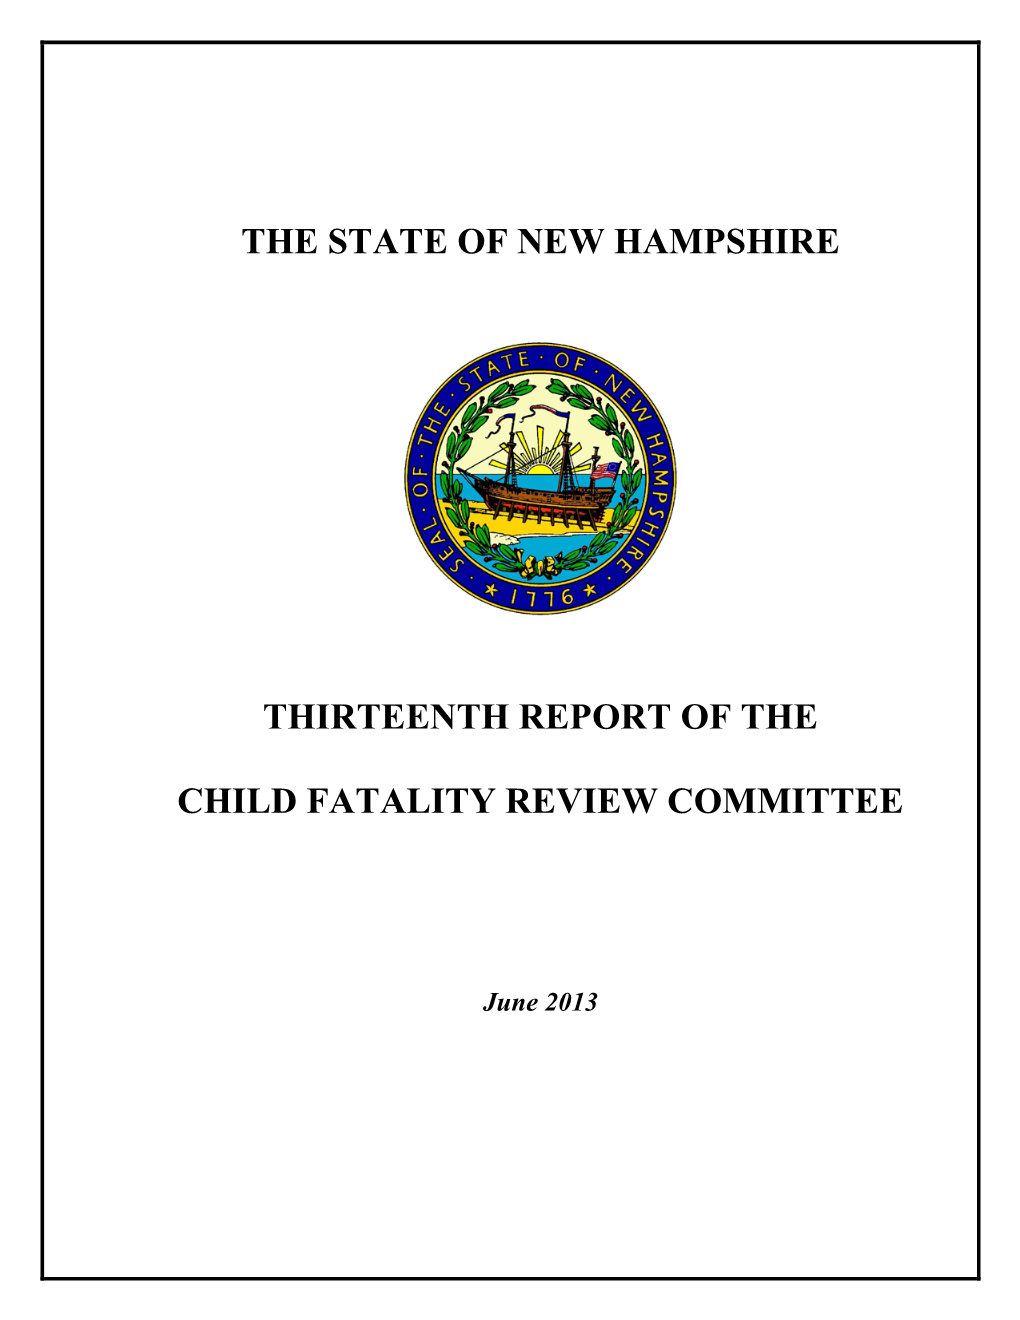 Child Fatality Report (2013)